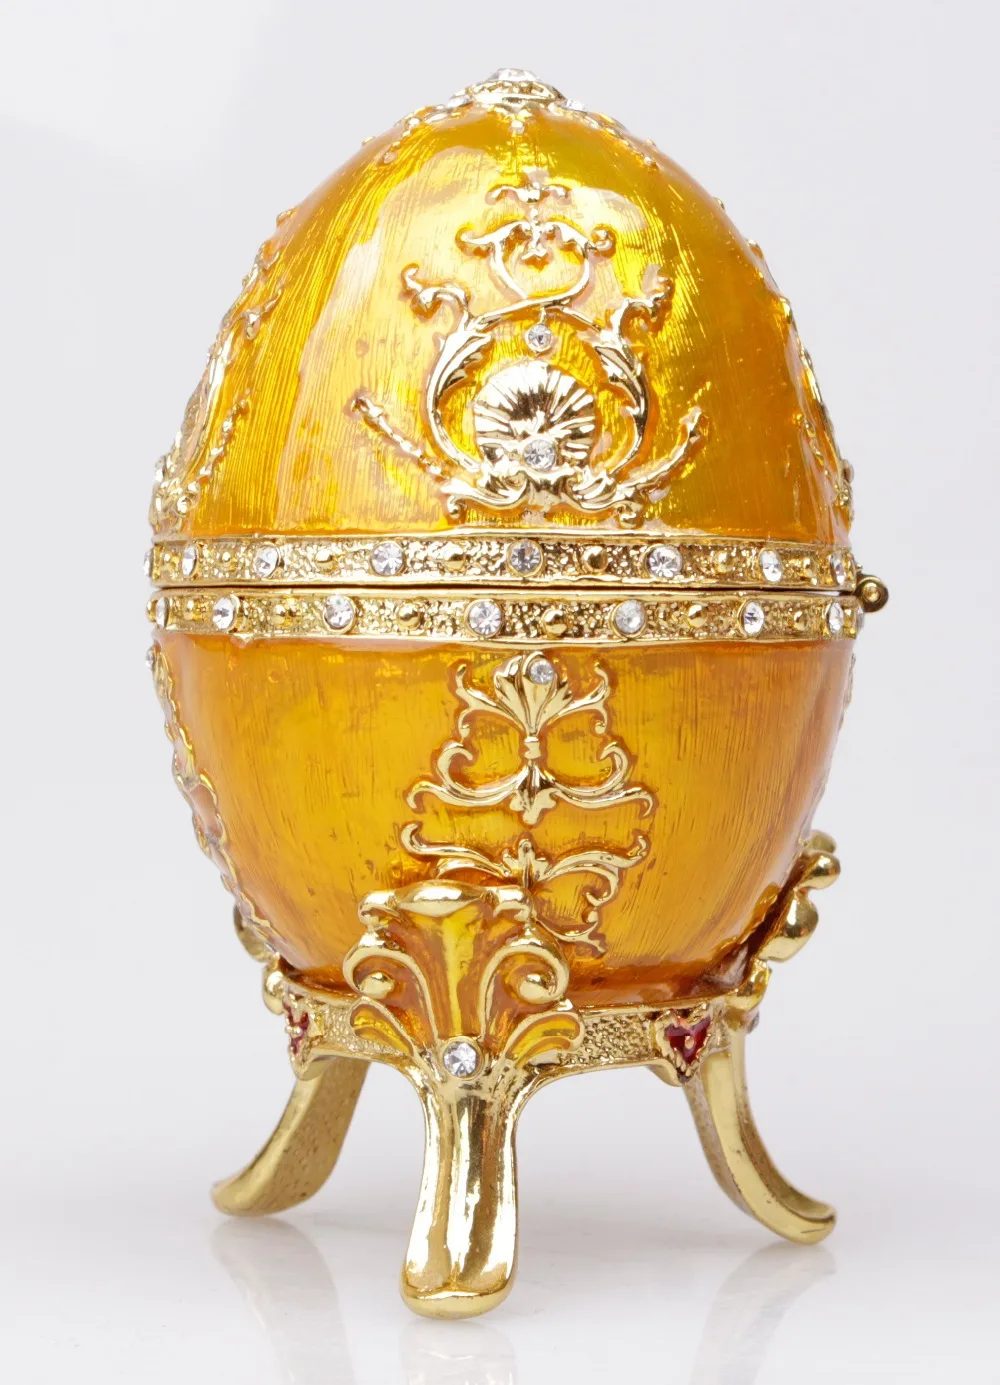 The Petroika Larissa Faberge-Style Enameled Egg Easter and Chirstmas Gift Box for Women